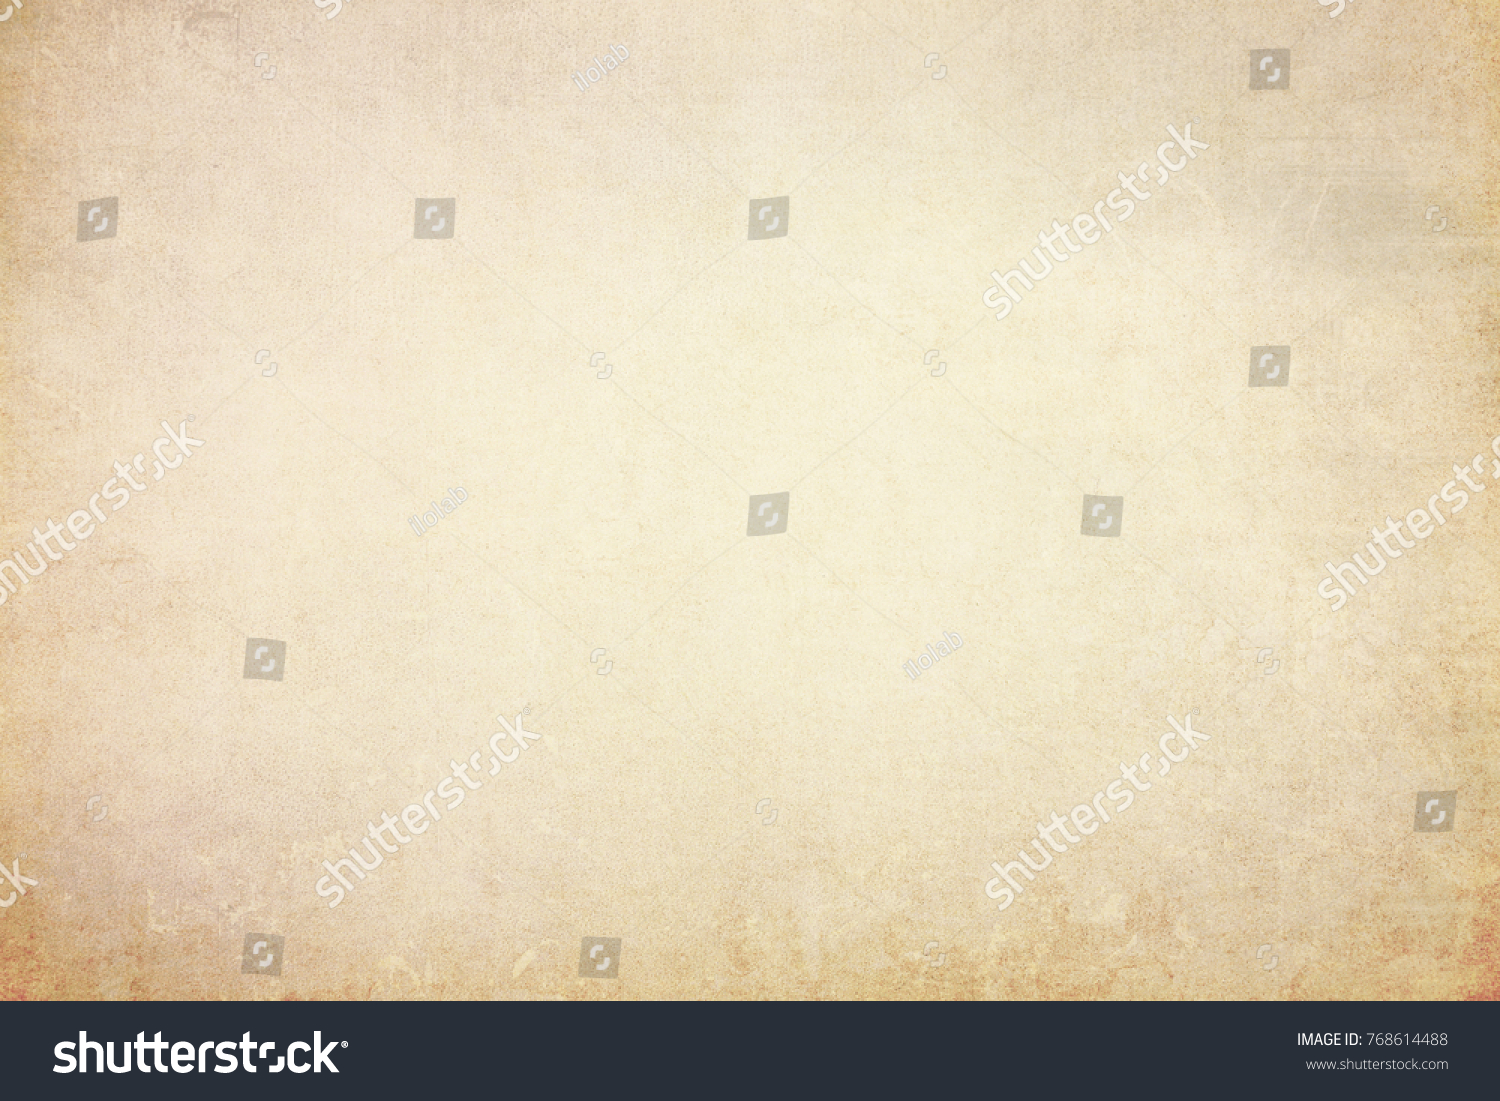 large grunge textures and backgrounds-perfect background with space for text or image
 #768614488